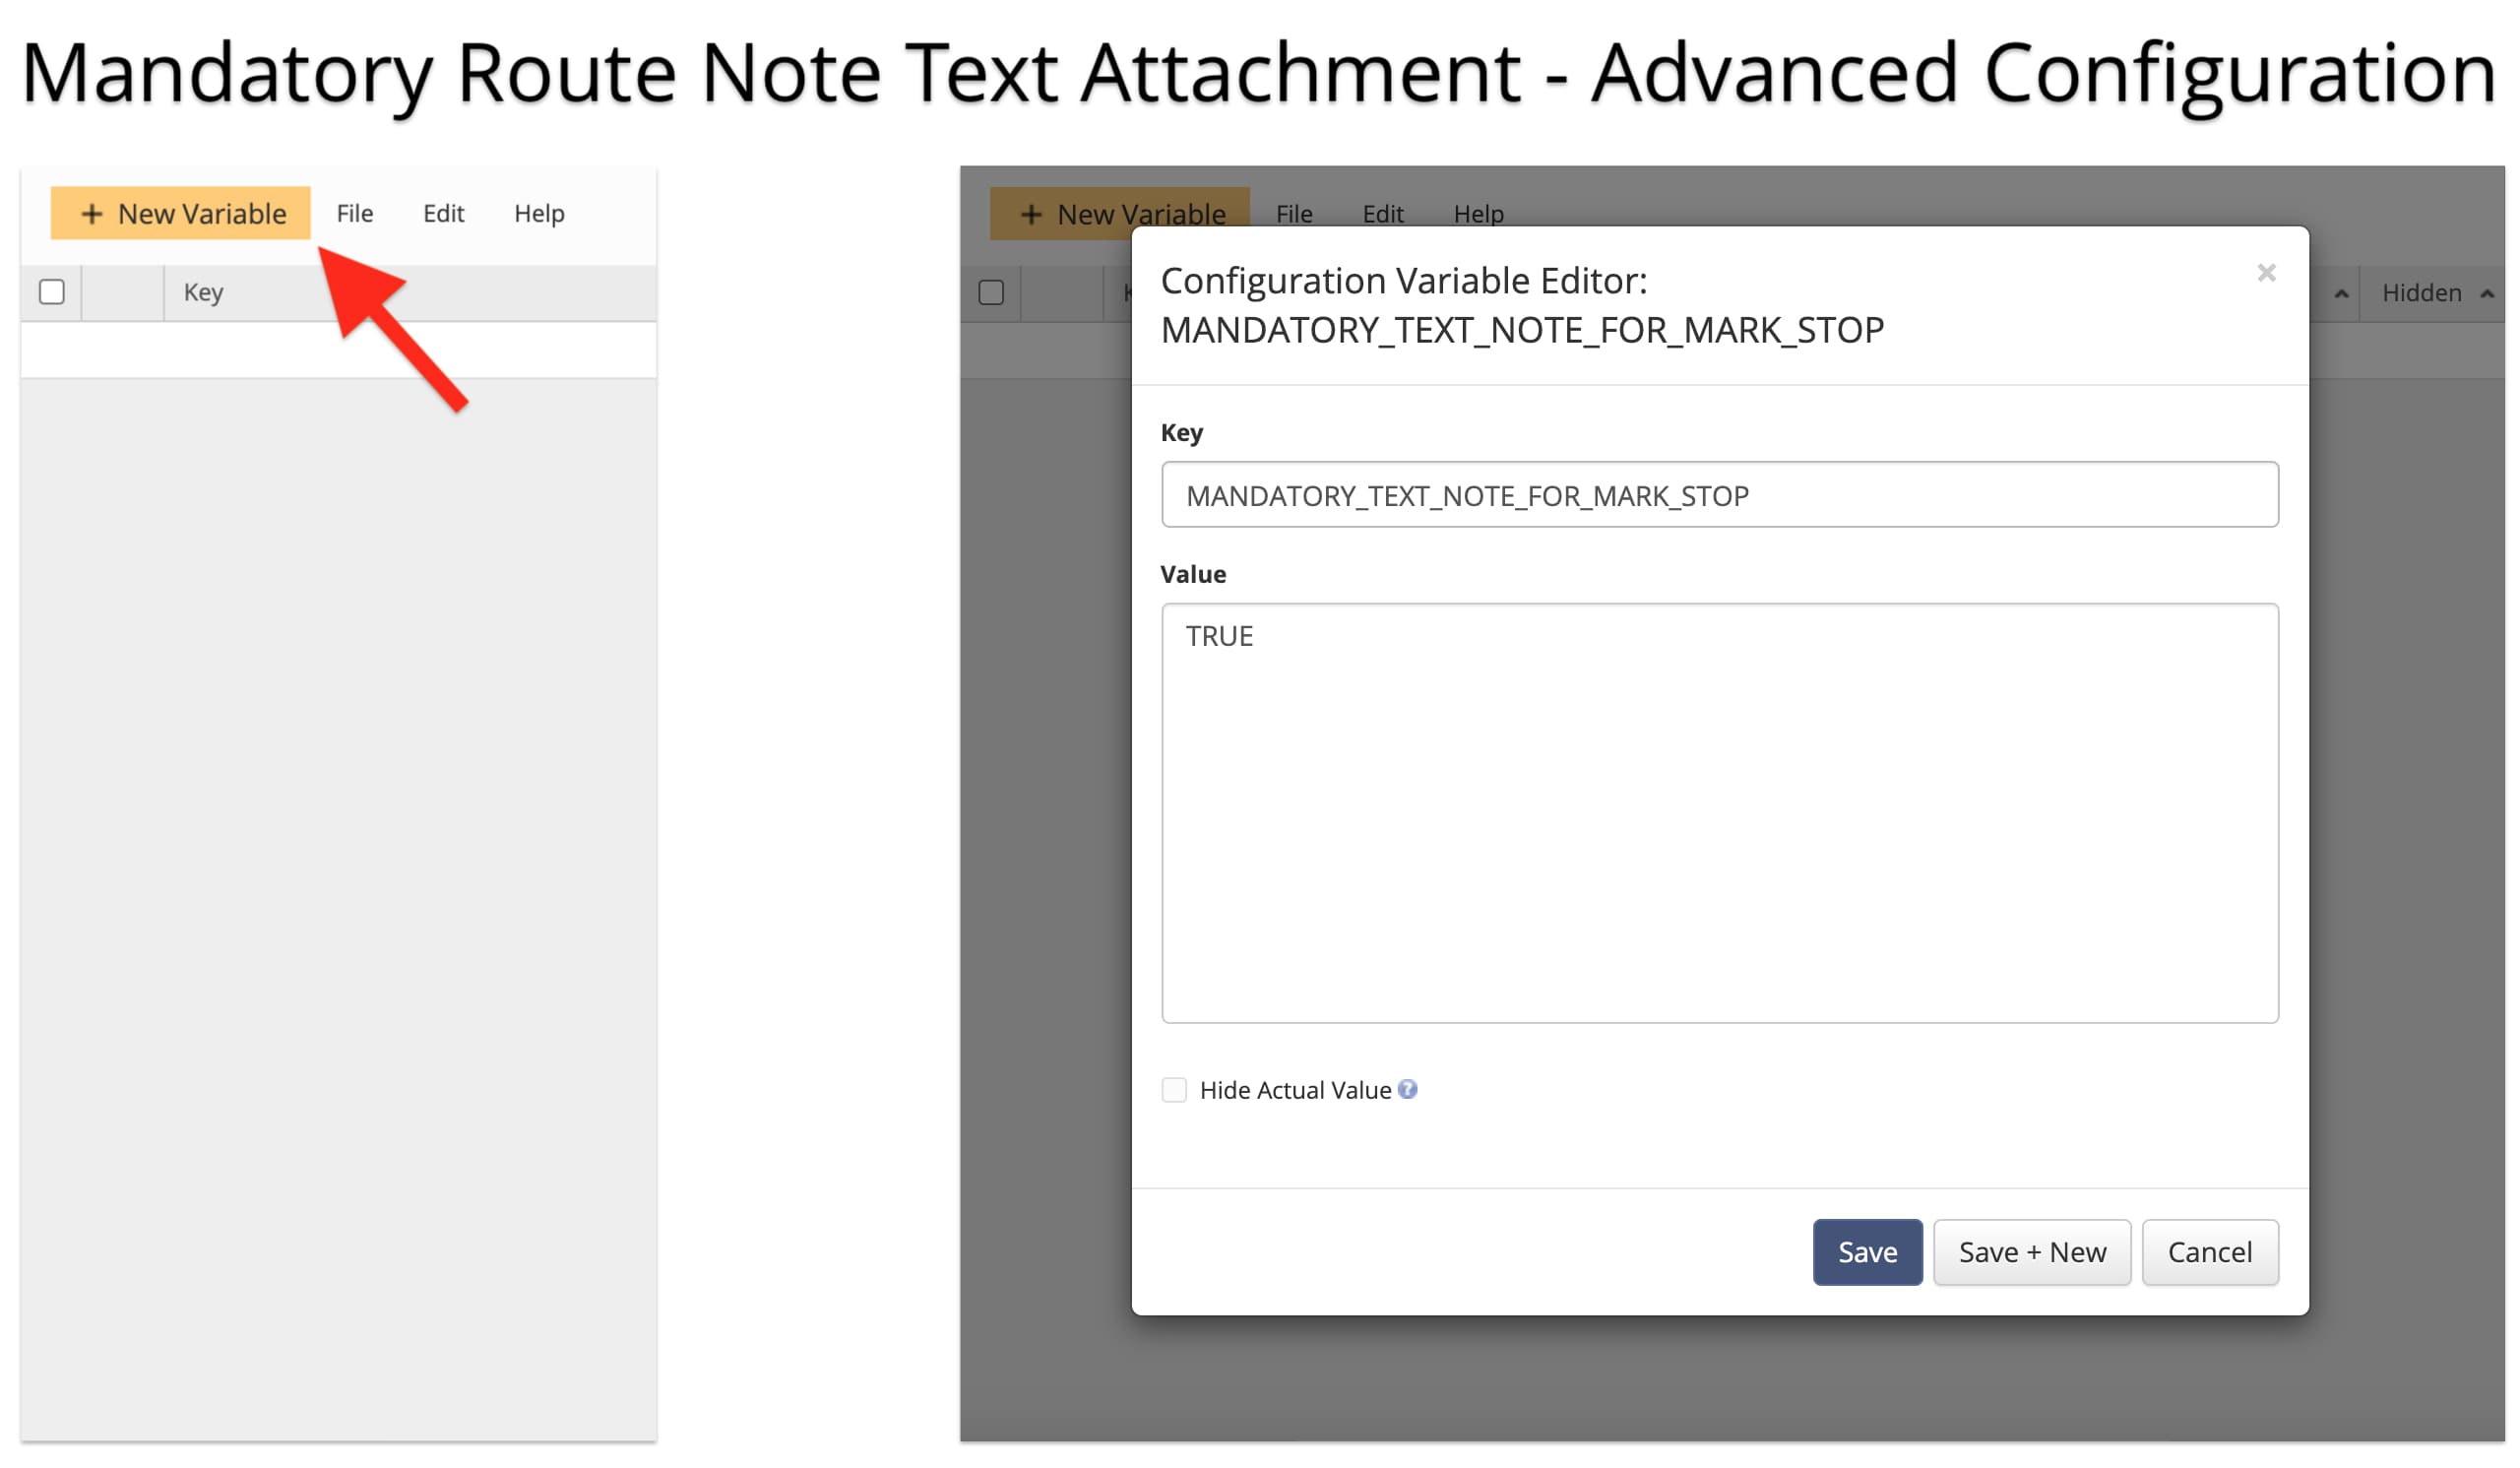 Enable mandatory note text attachment to collect electronic POD on mobile route planner apps.